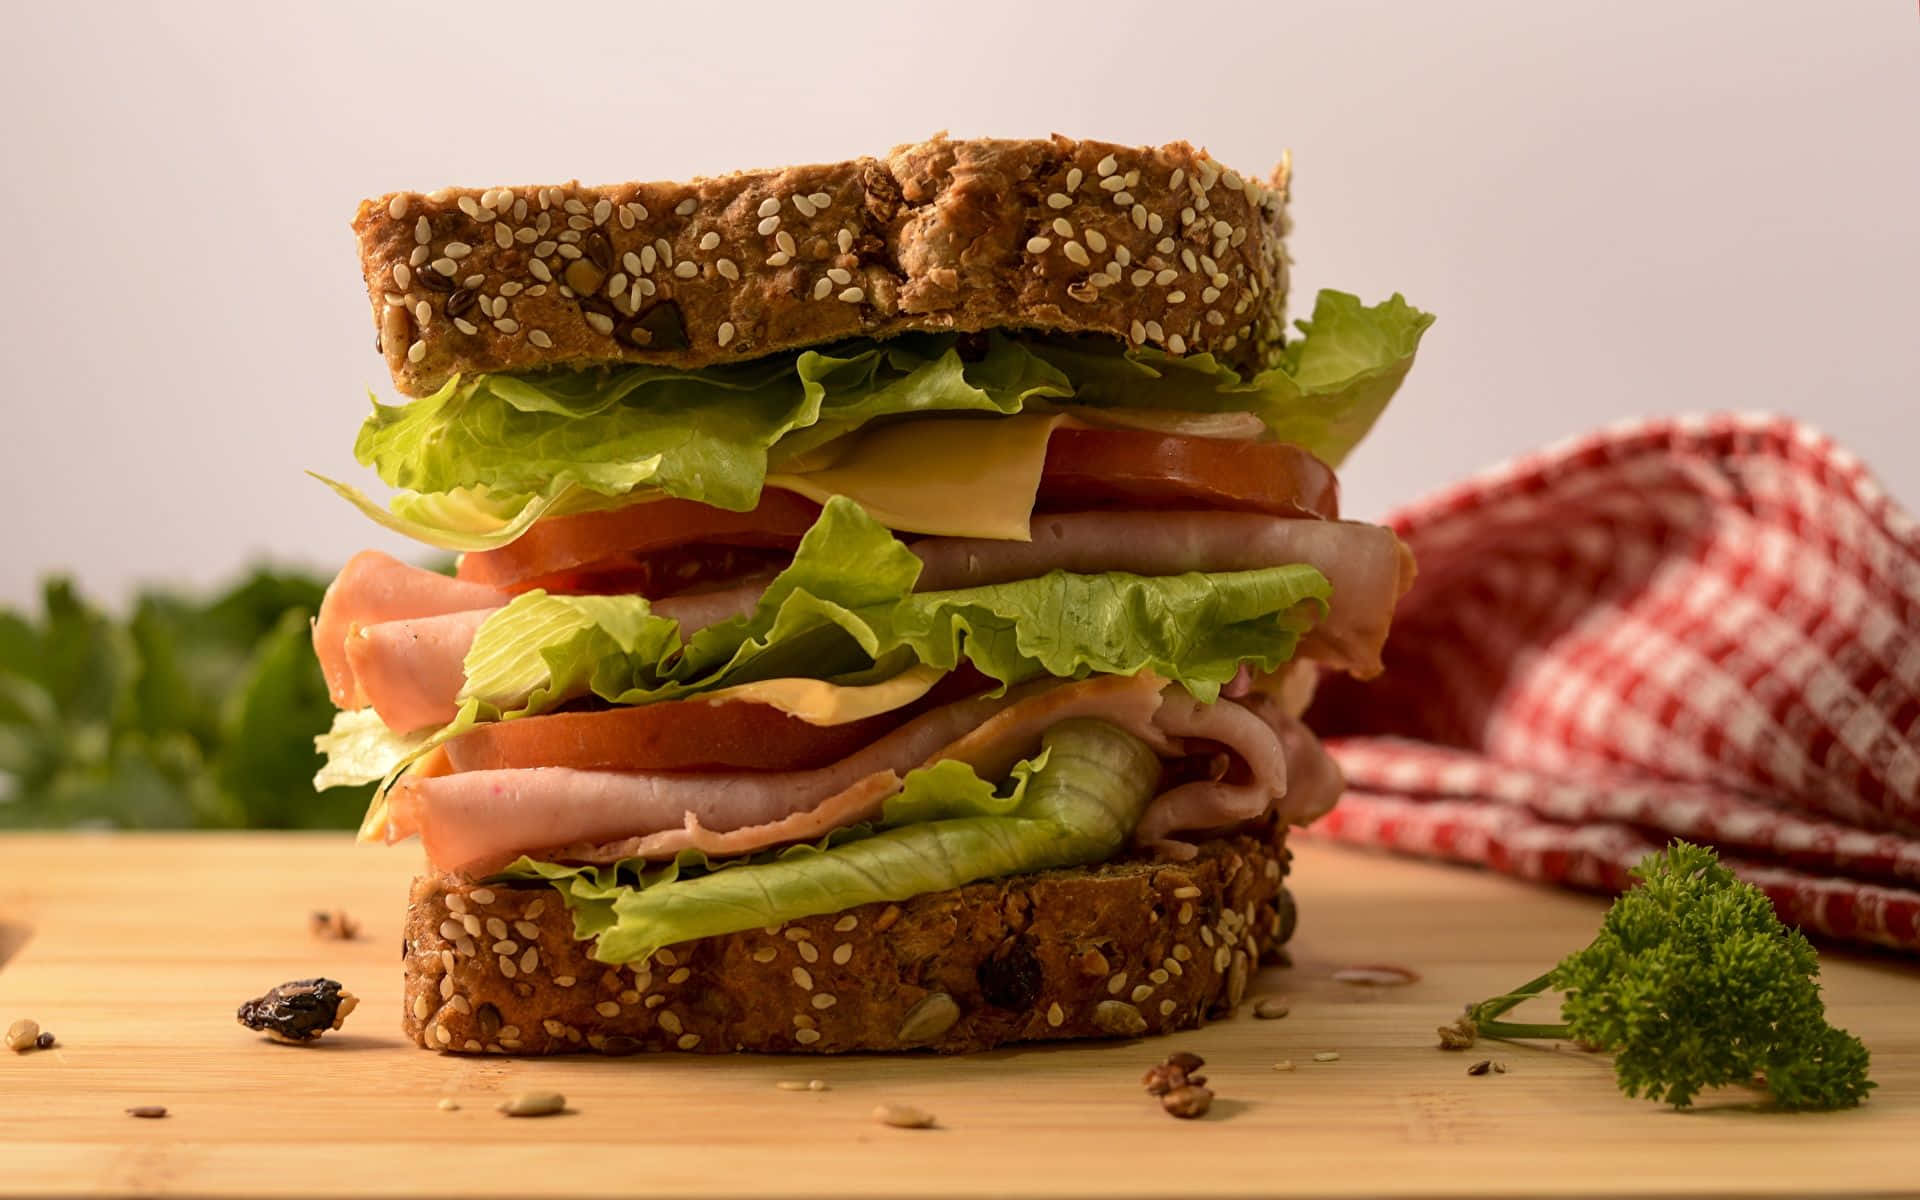 A Sandwich With Ham, Lettuce And Tomatoes On A Wooden Cutting Board